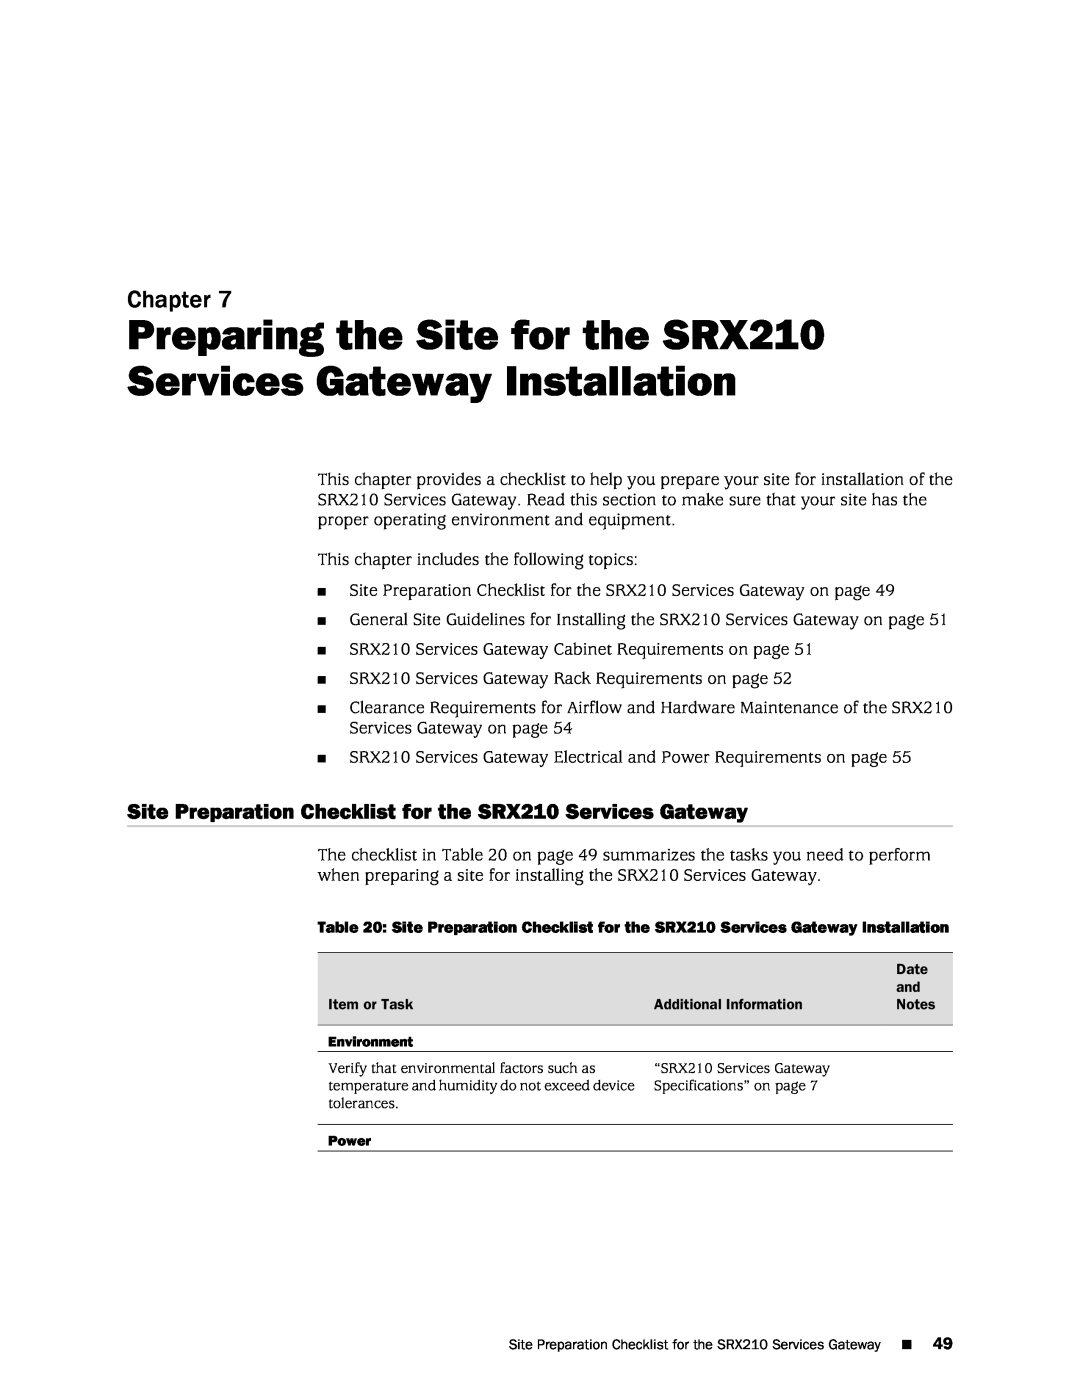 Juniper Networks SRX 210 manual Preparing the Site for the SRX210 Services Gateway Installation, Chapter 